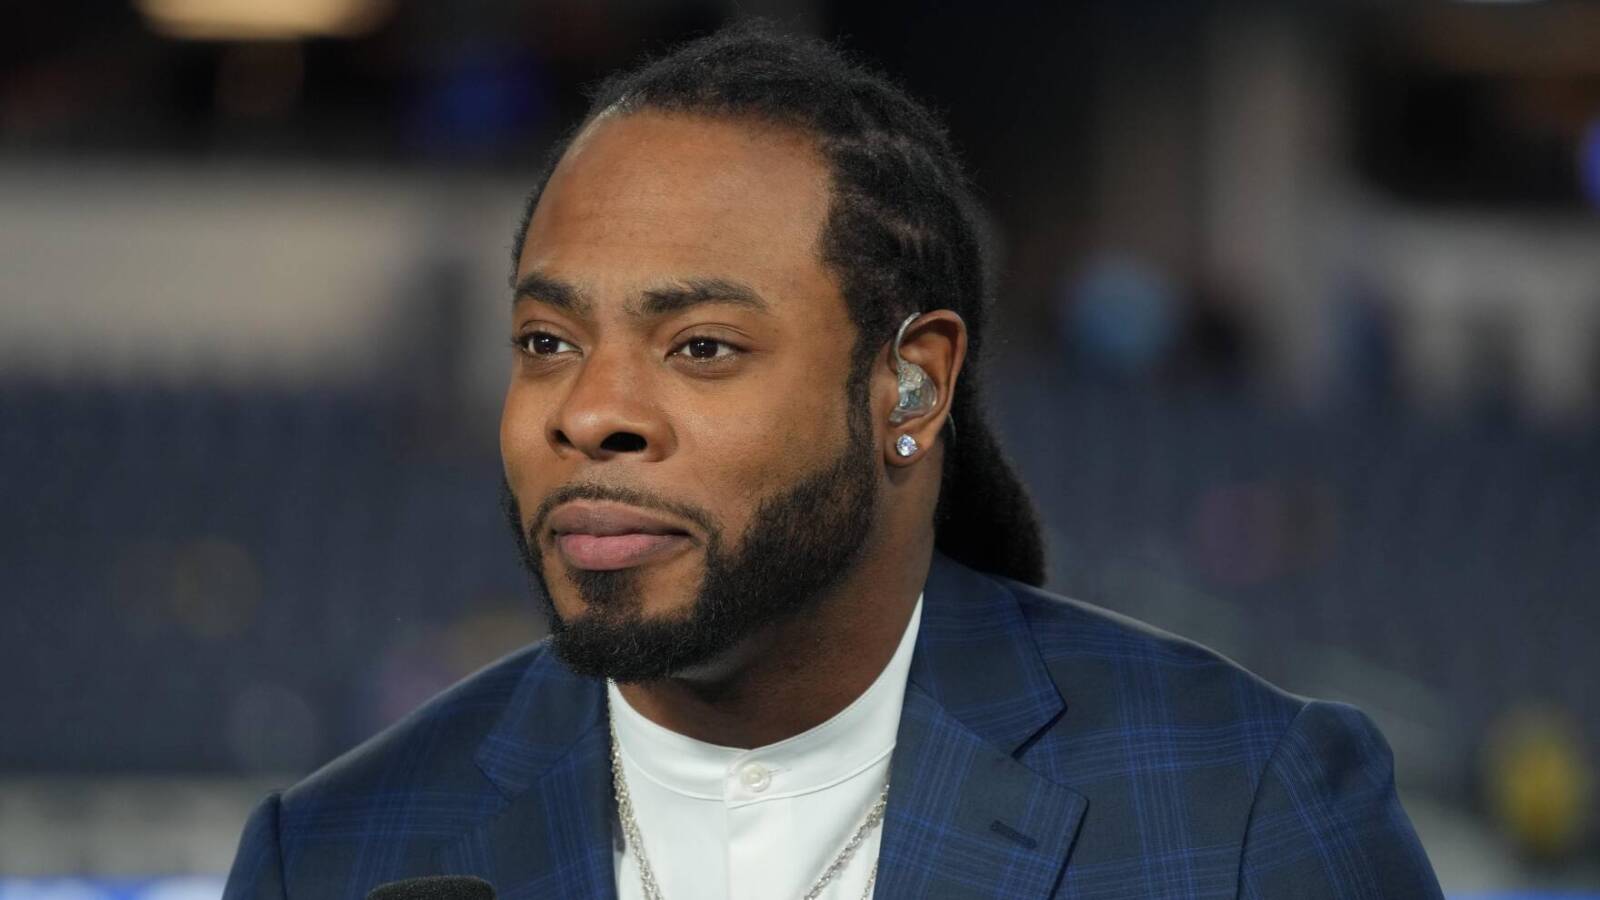 Richard Sherman on new NFL rule proposal: 'Ruining the game'